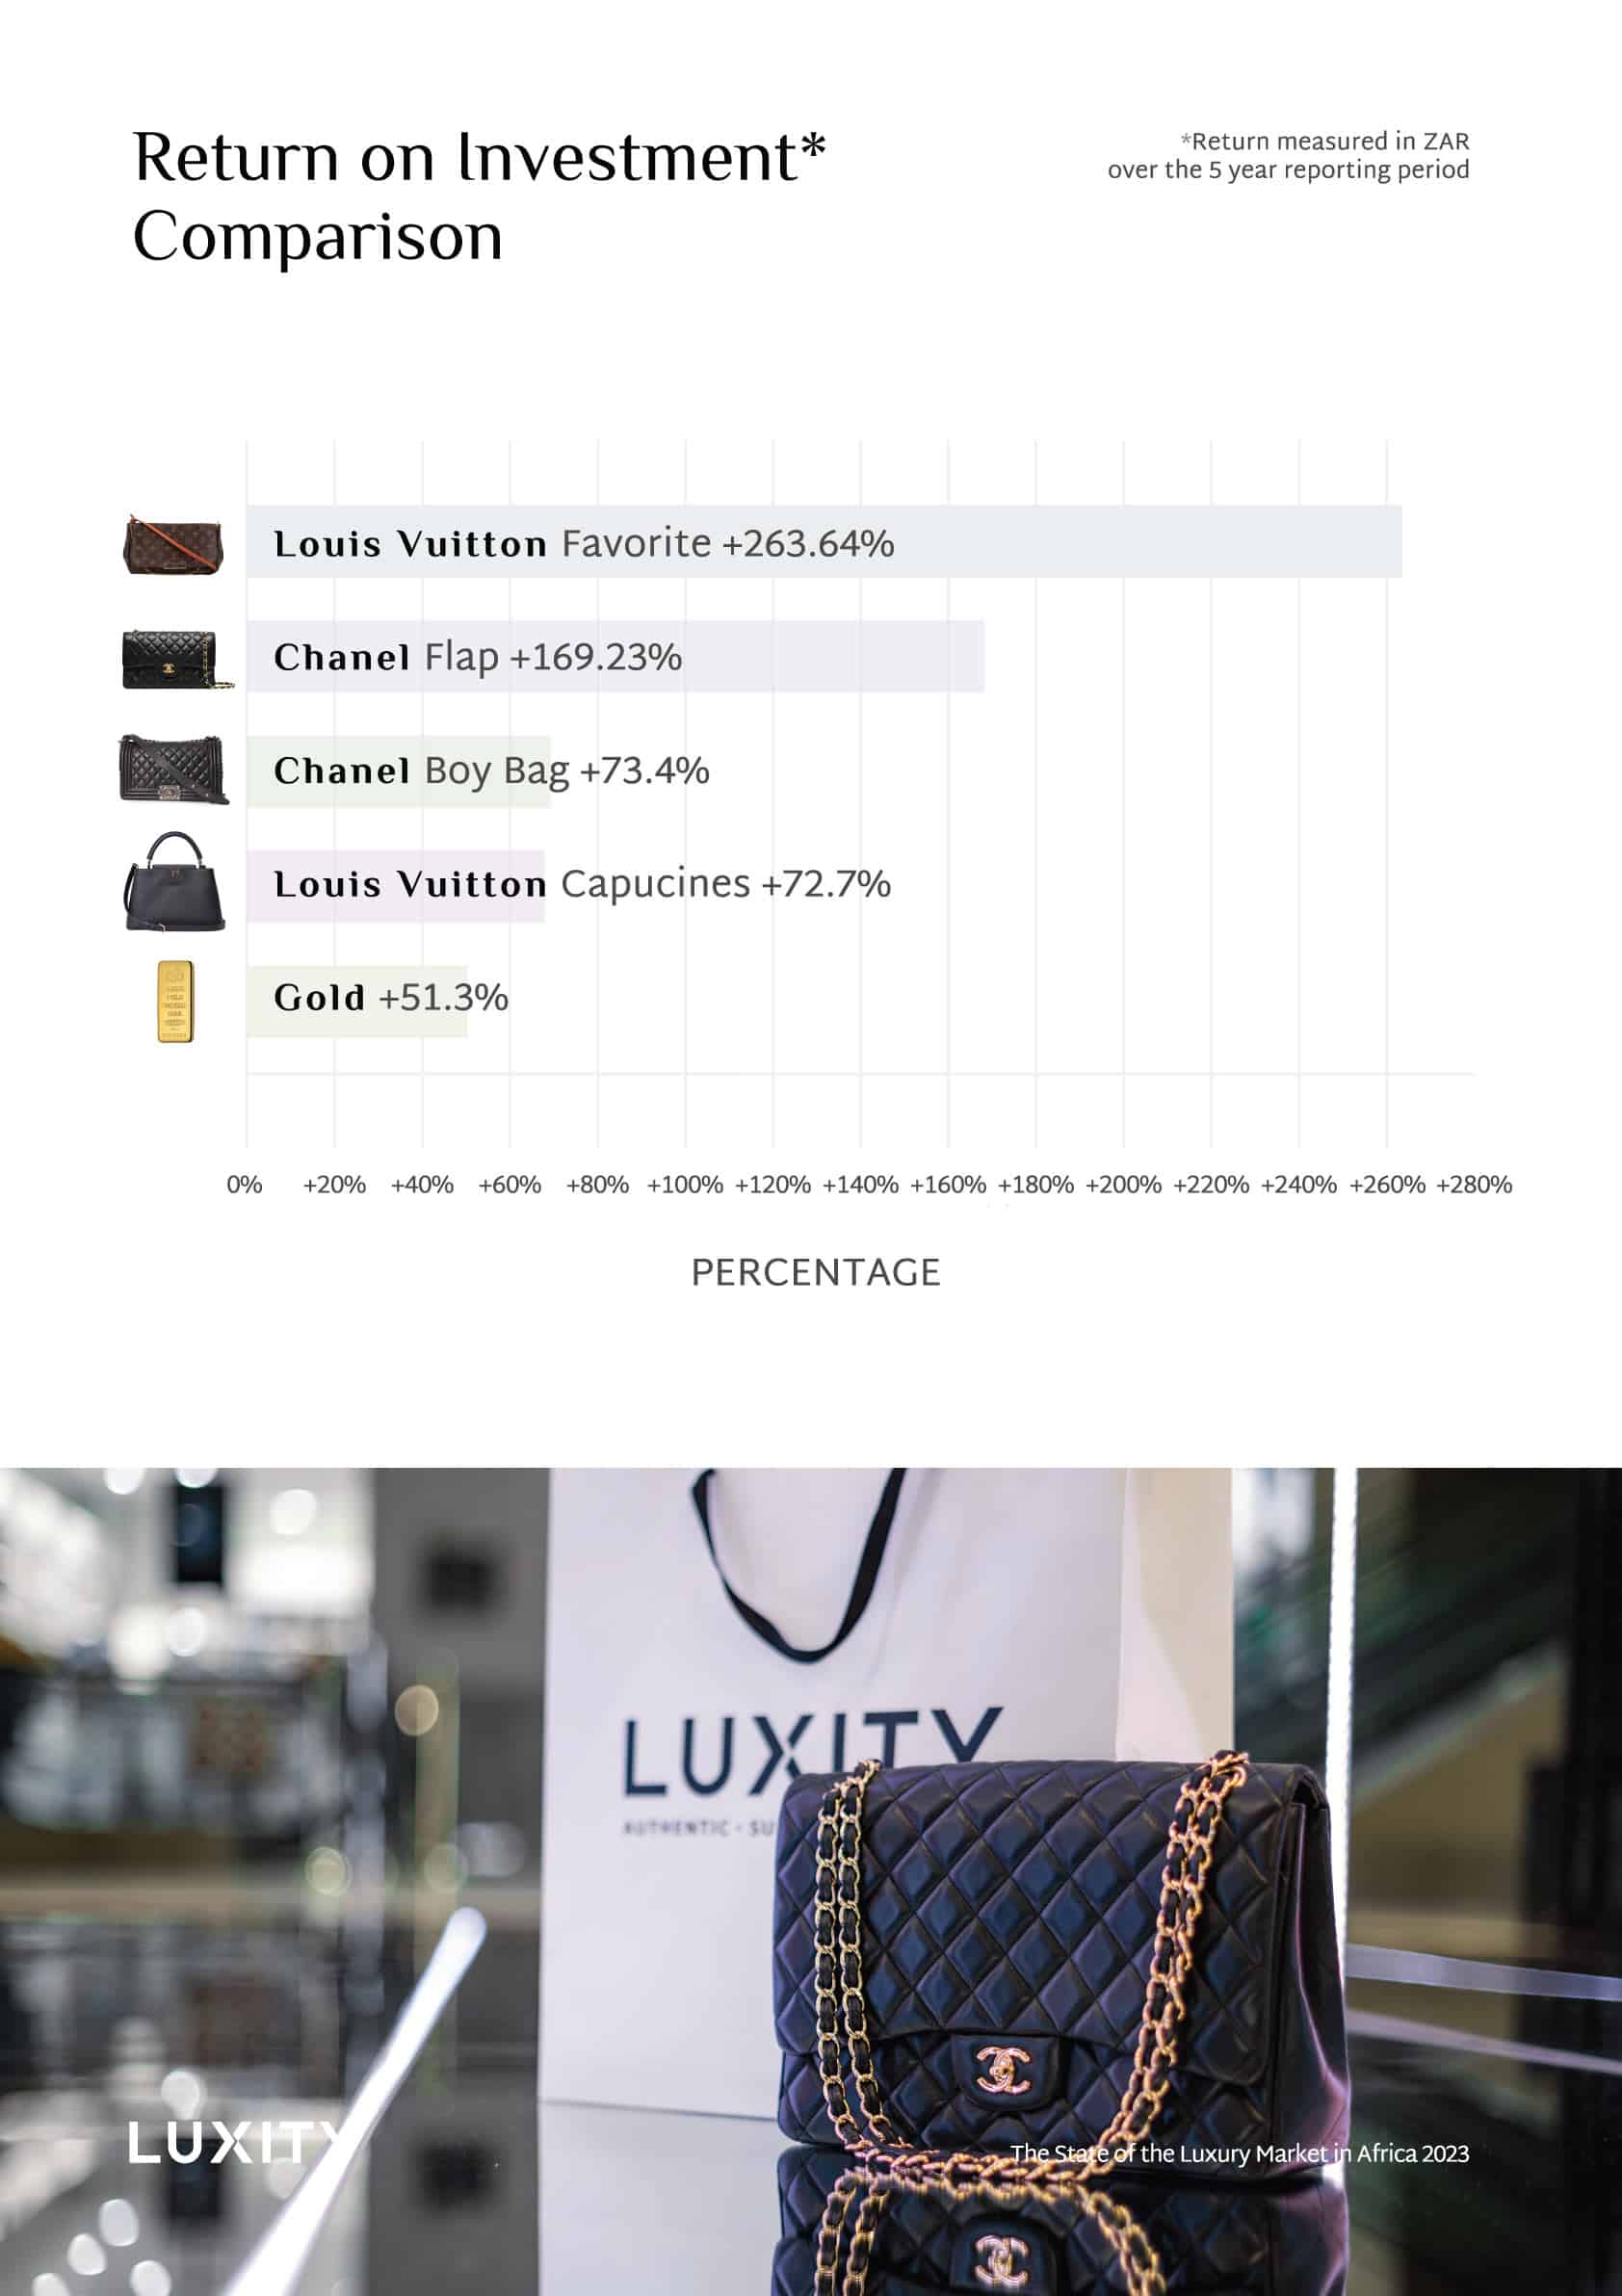 MY TOP 5 MOST USED BAGS! Ft: Louis Vuitton, YSL, Ferragamo, Chanel